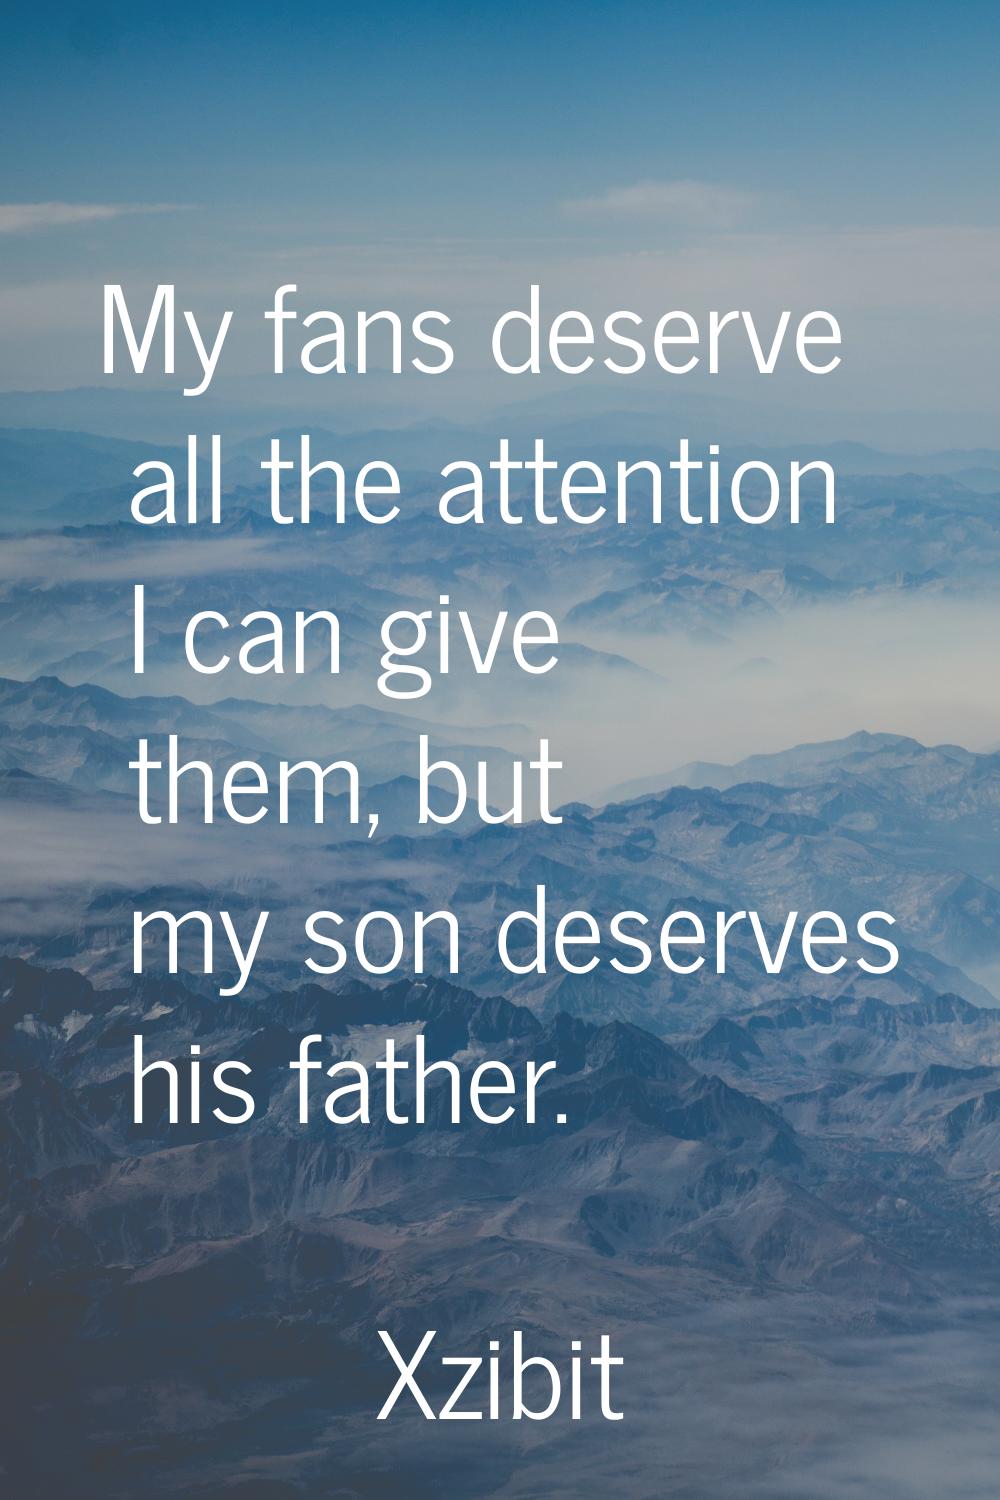 My fans deserve all the attention I can give them, but my son deserves his father.